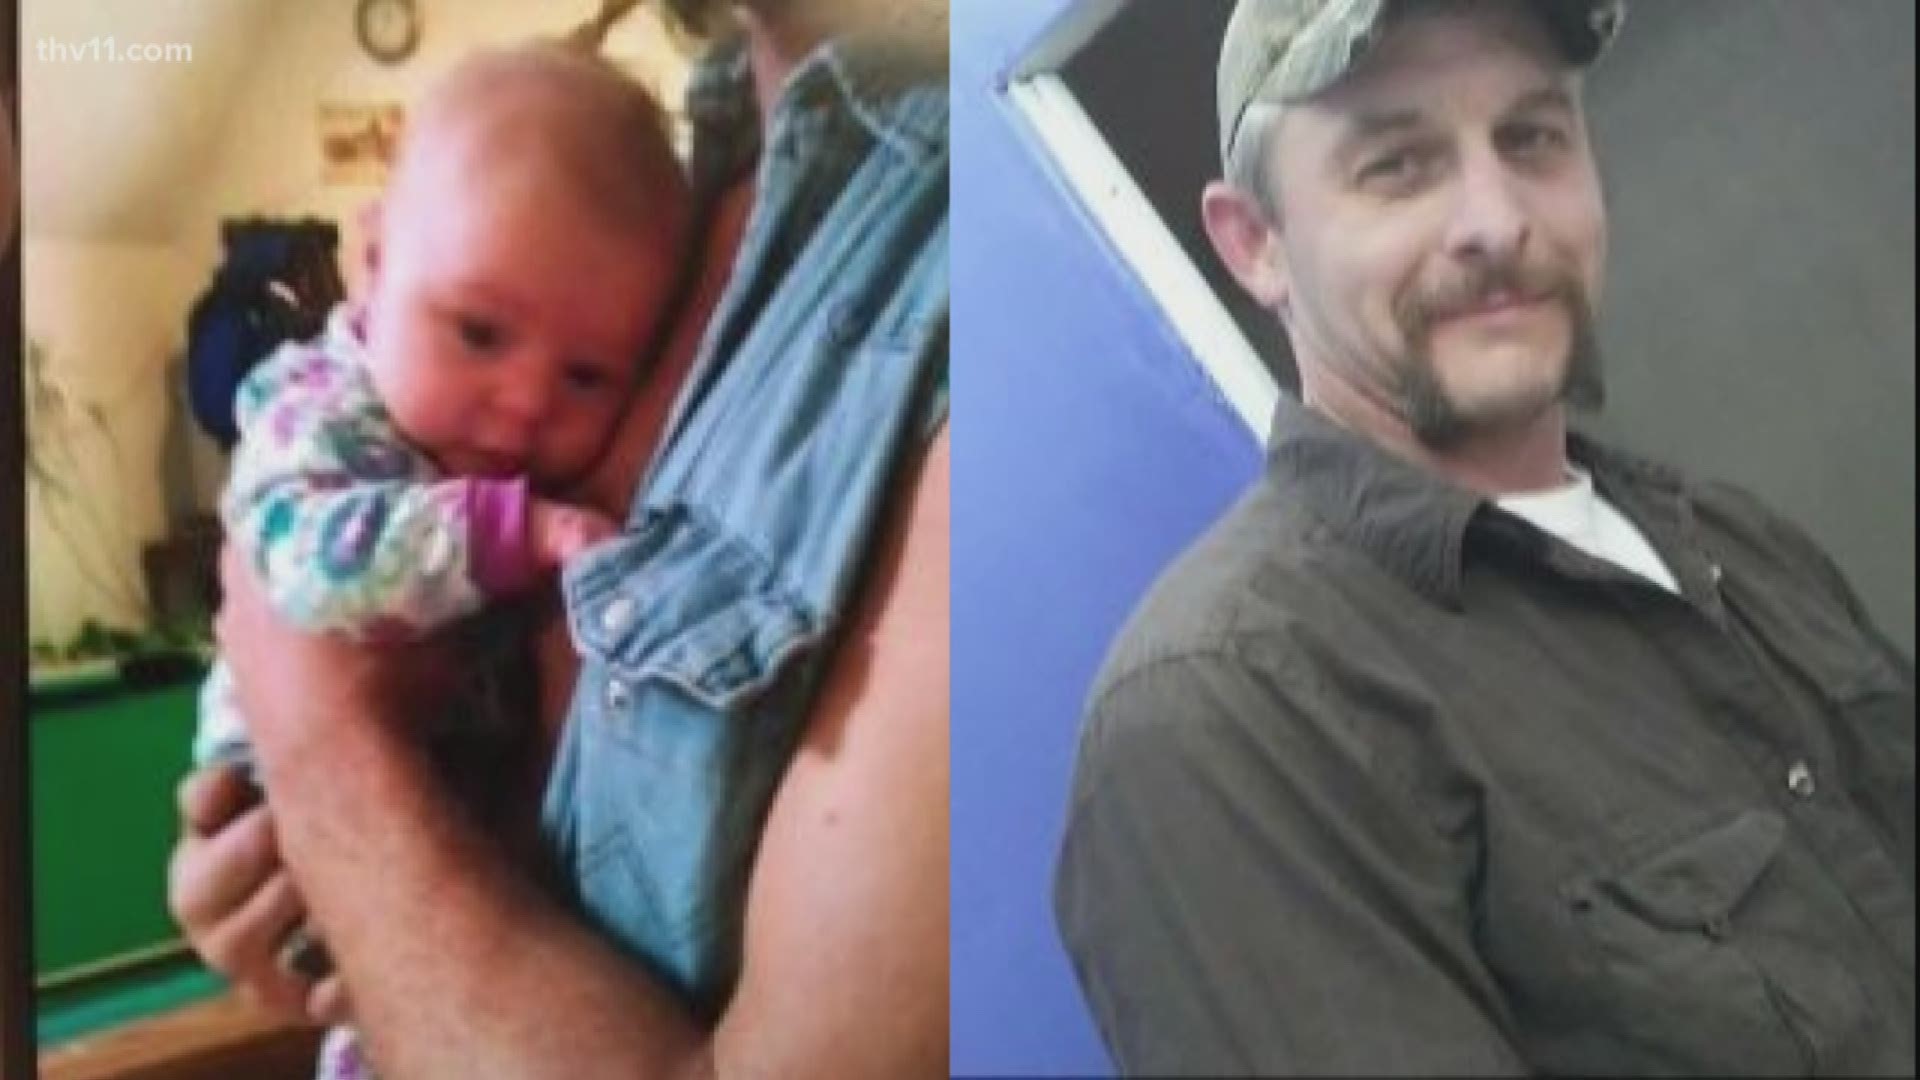 Police are looking for a man that allegedly abducted a 2-month-old from Washington County.